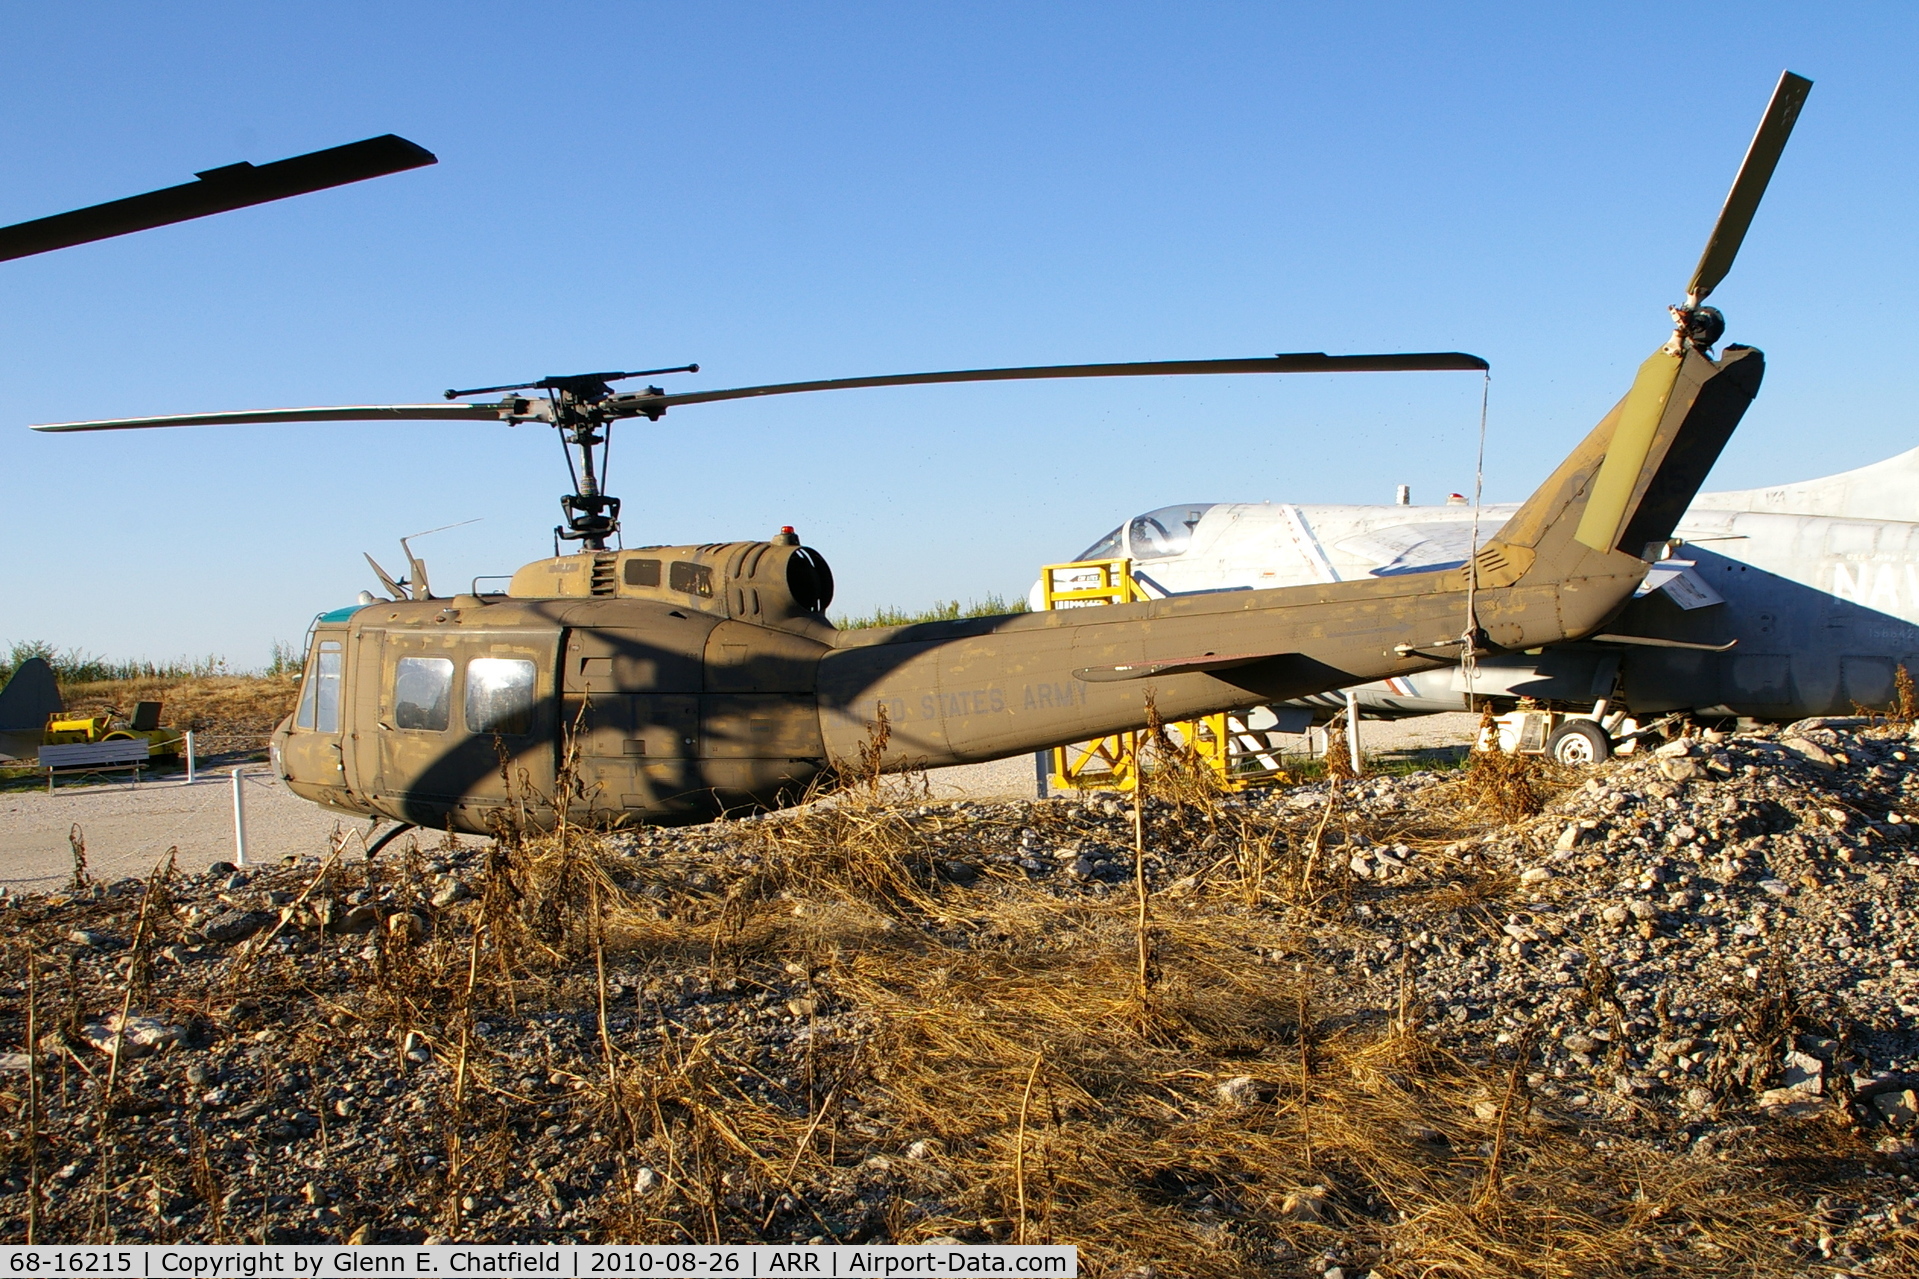 68-16215, 1968 Bell UH-1H Iroquois C/N 10874, At Air Classics Museum